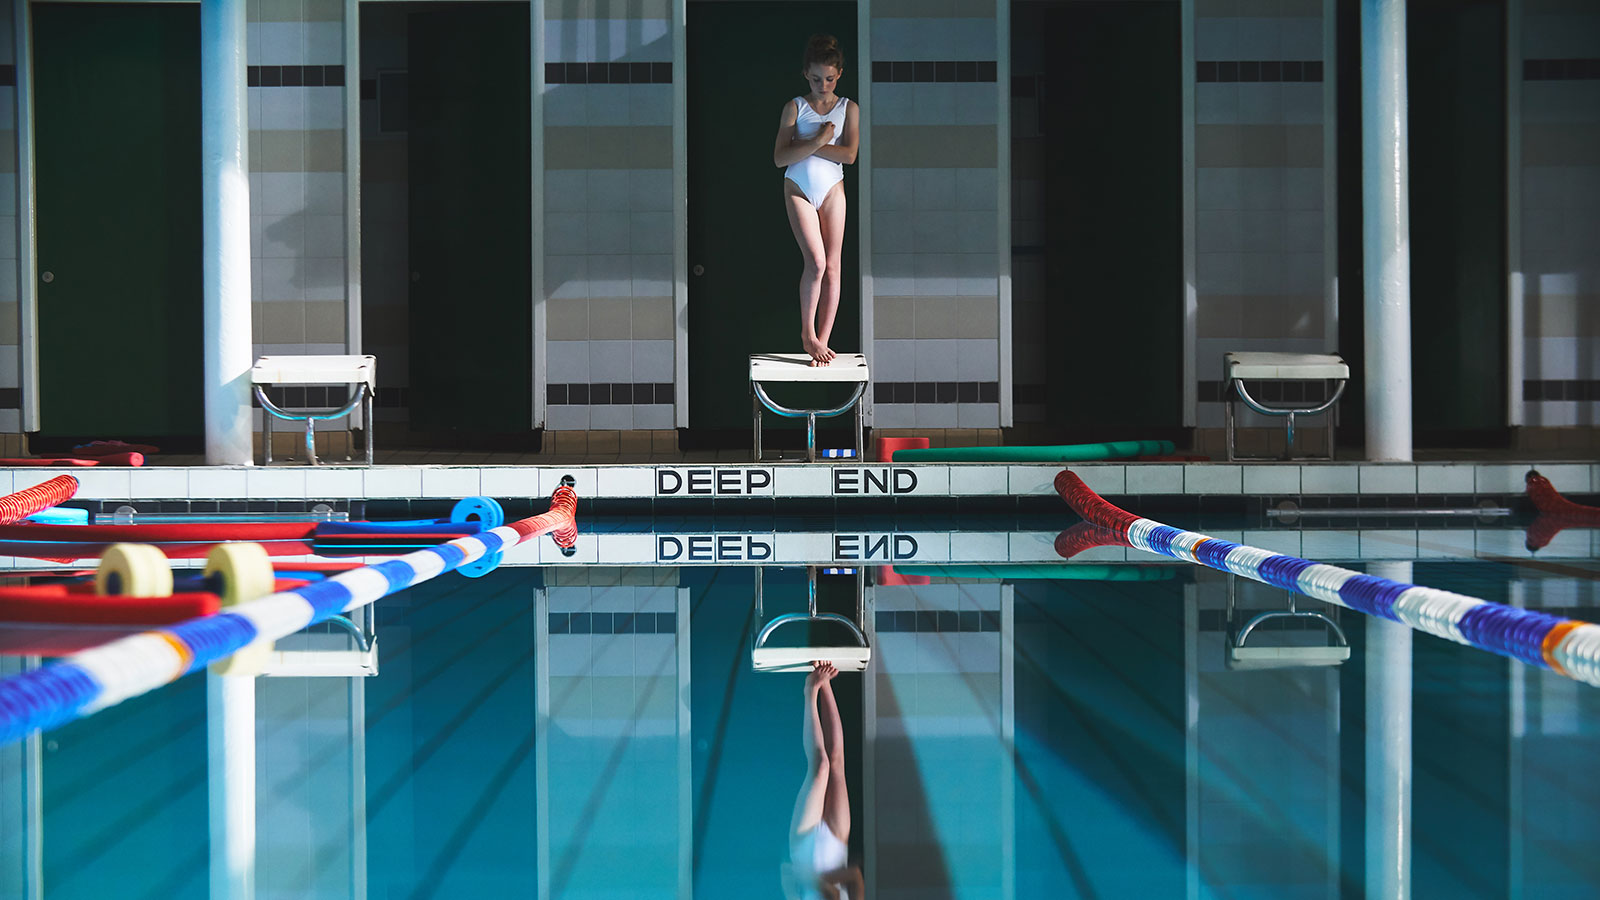 A young girl stands on a diving board about to jump into a pool